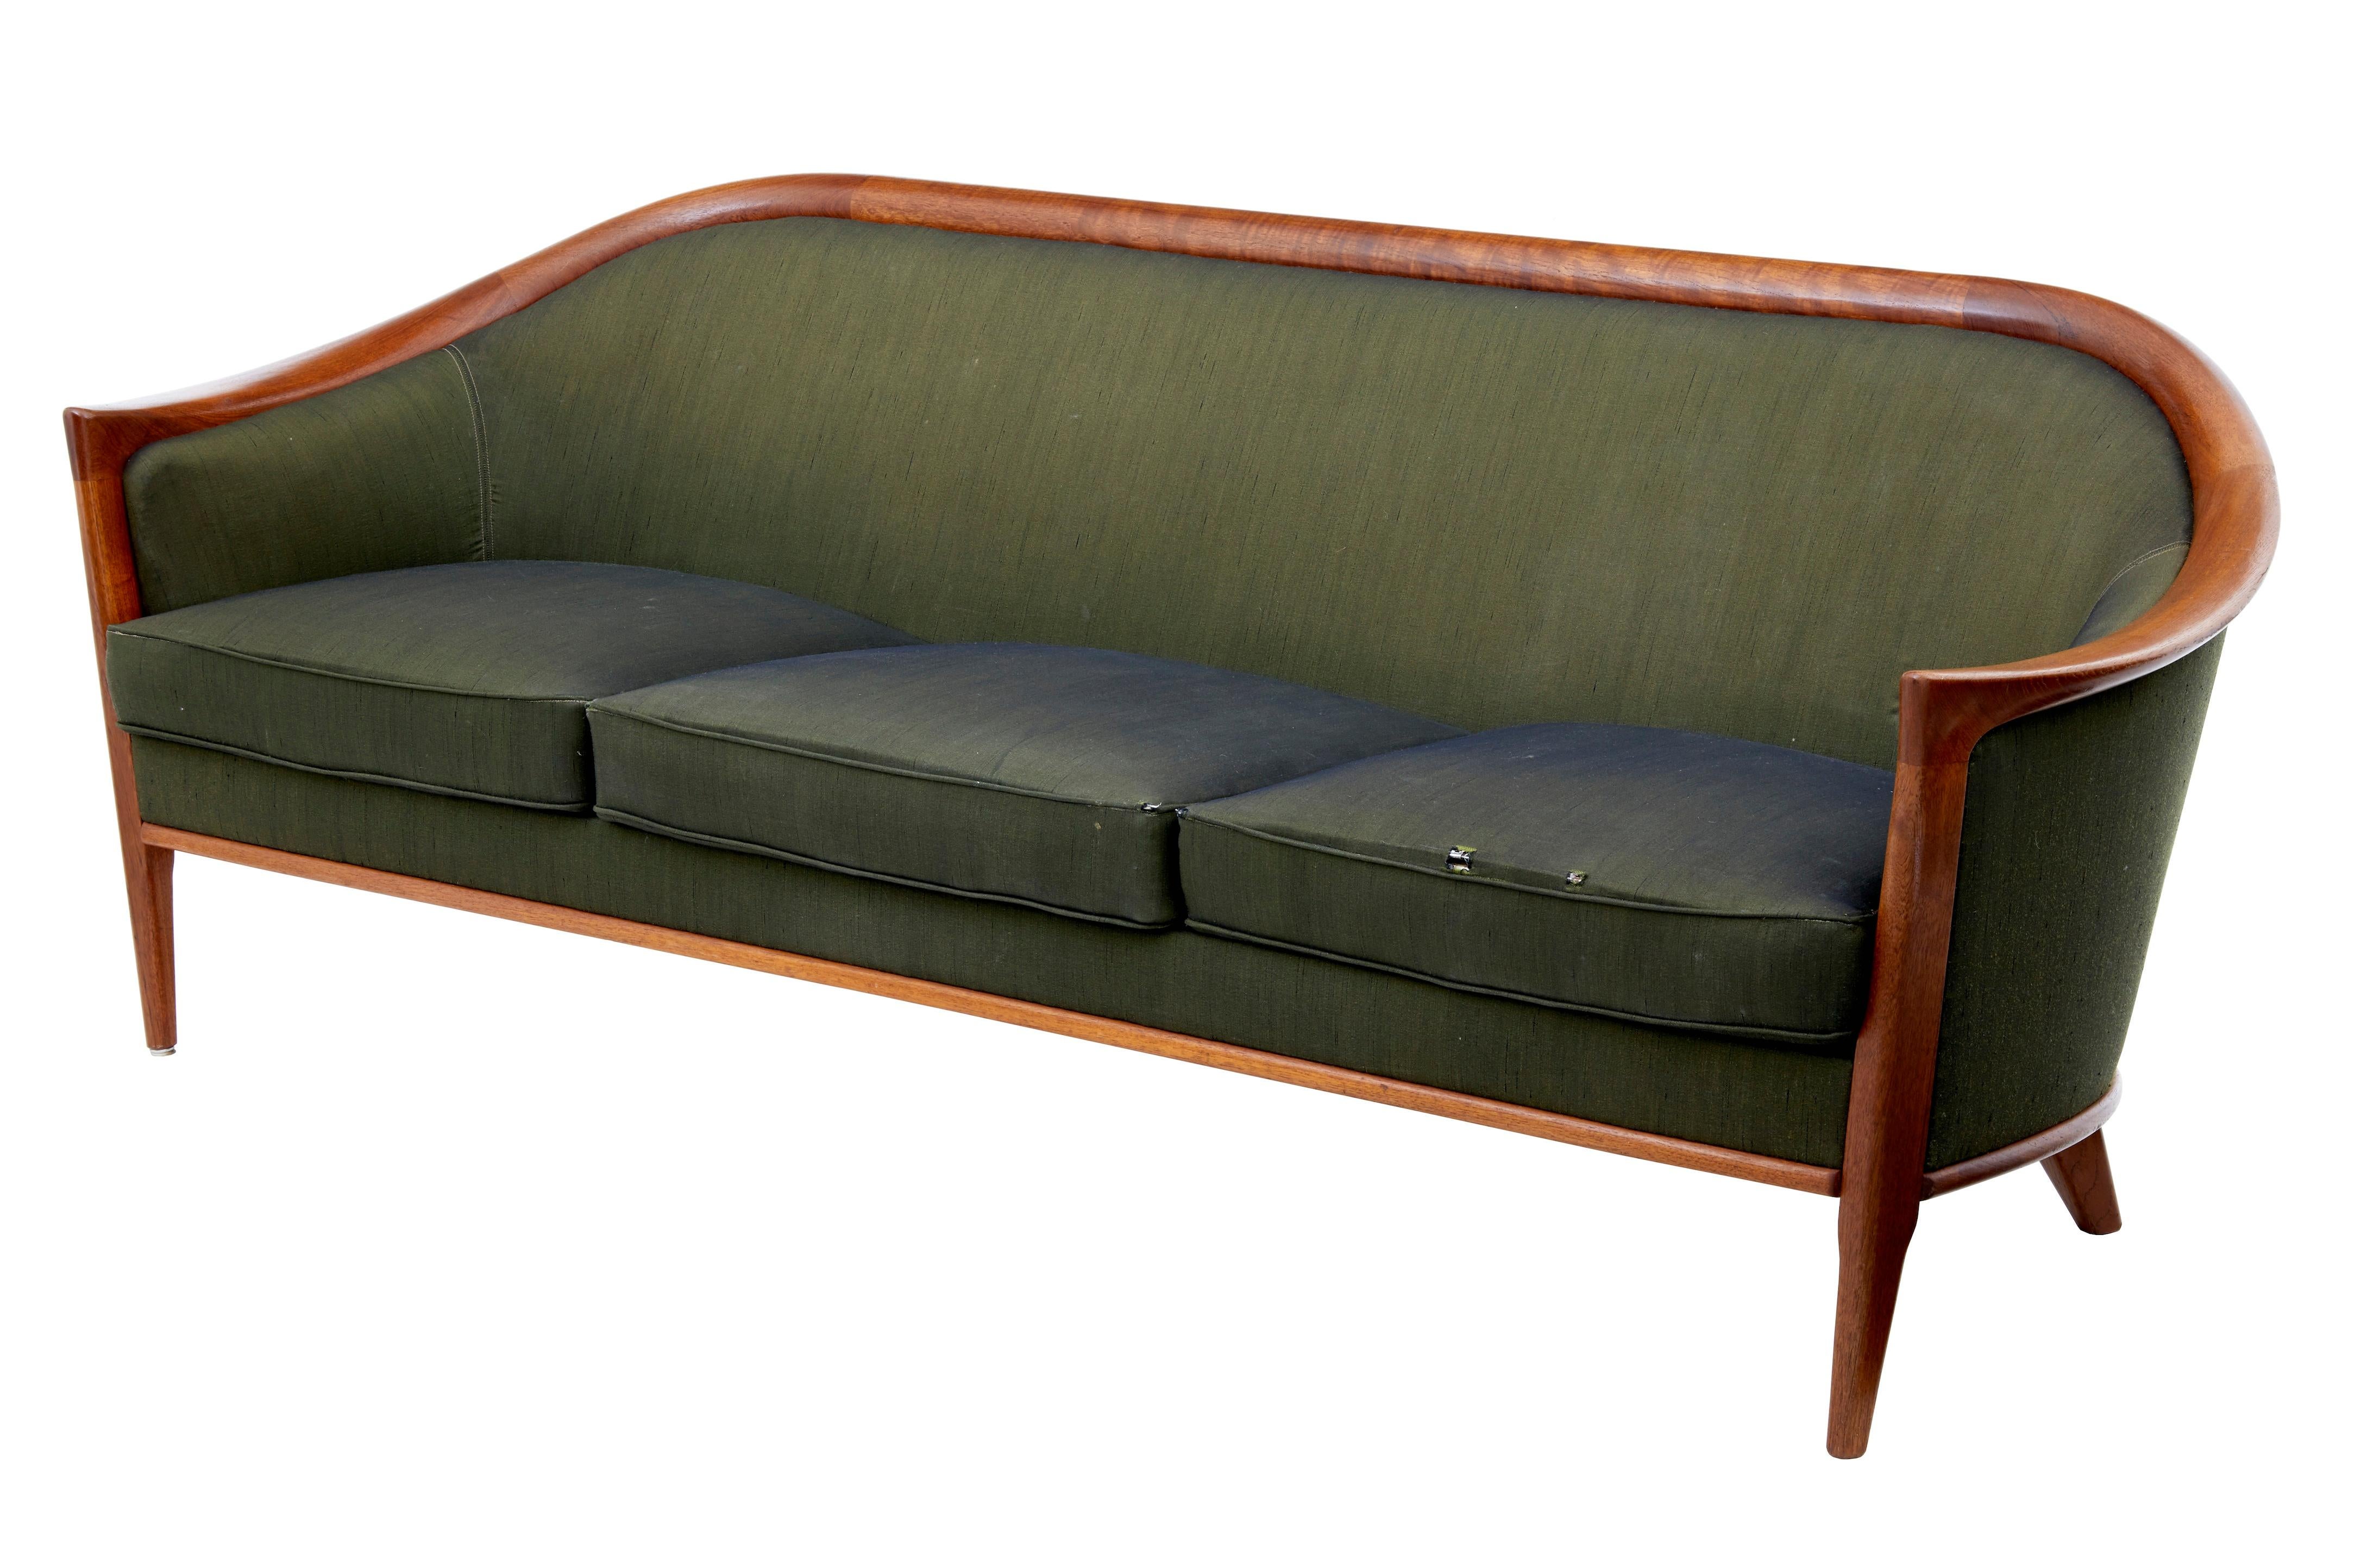 Fine piece of Scandinavian design, classic horseshoe shaped back in teak. Upholstered in olive green material. Some light staining and holes to the front edge of two sofa cushions exposing the metal work framing. Ideal for recovering the